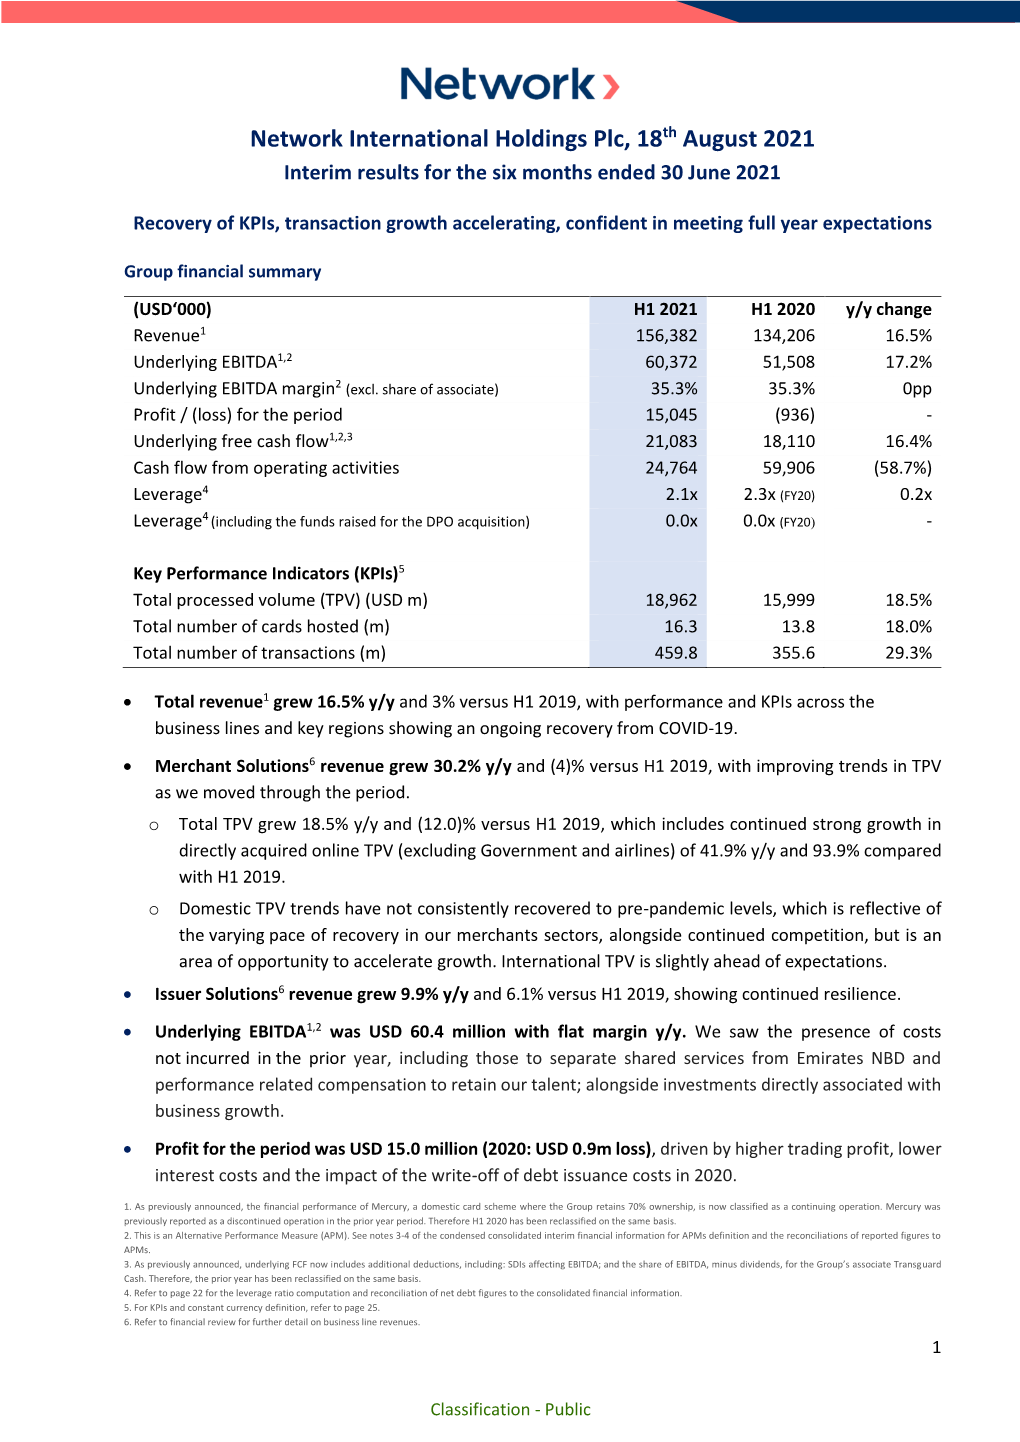 Network International Holdings Plc, 18Th August 2021 Interim Results for the Six Months Ended 30 June 2021